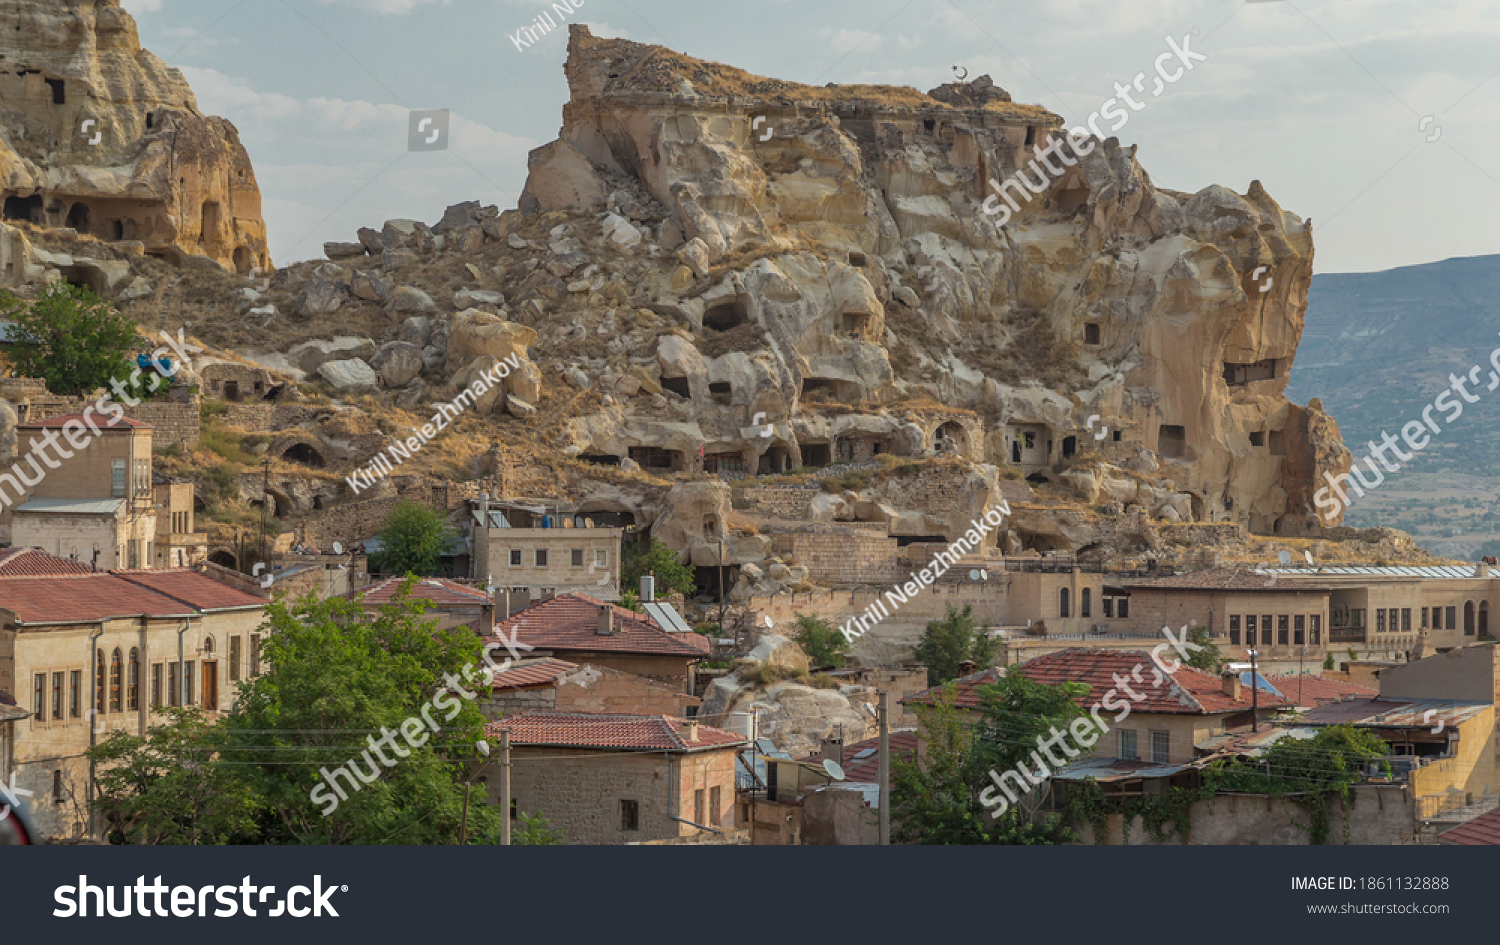 Urgup Town aerial view from Temenni Hill in Cappadocia Region of Turkey timelapse. Old houses and buildings in rocks at early morning #1861132888